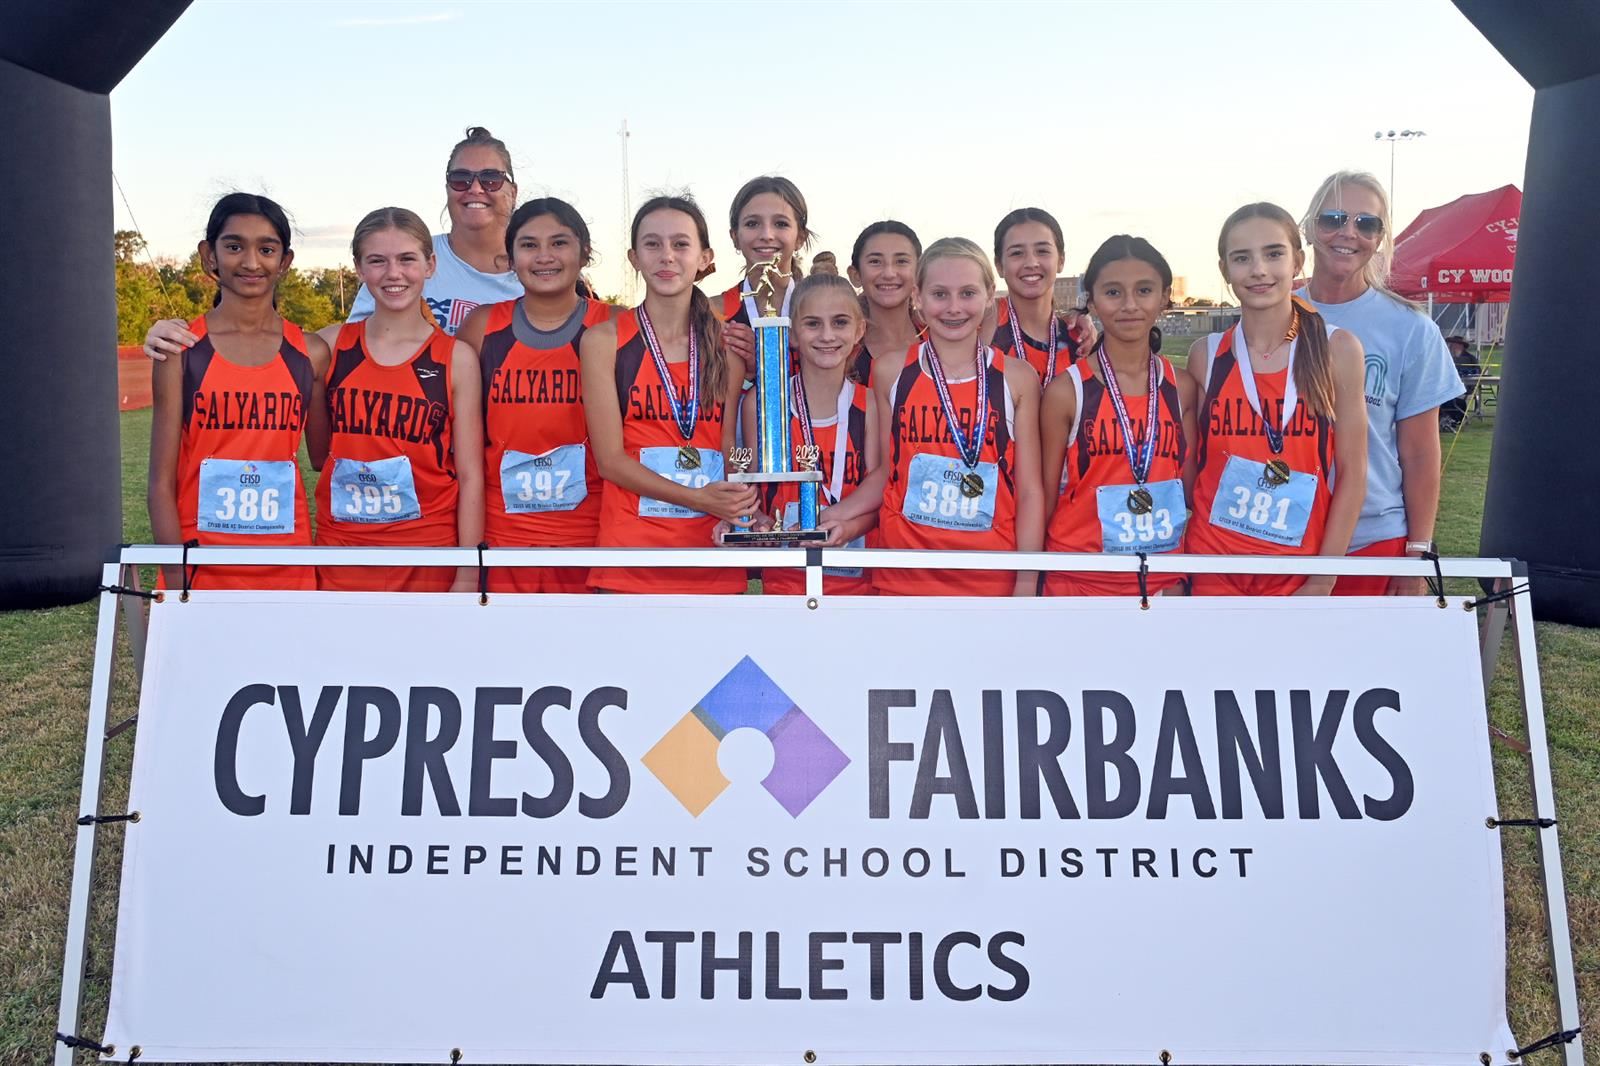 Anthony Middle School won the seventh grade girls’ cross country team championships with a score of 52 points.